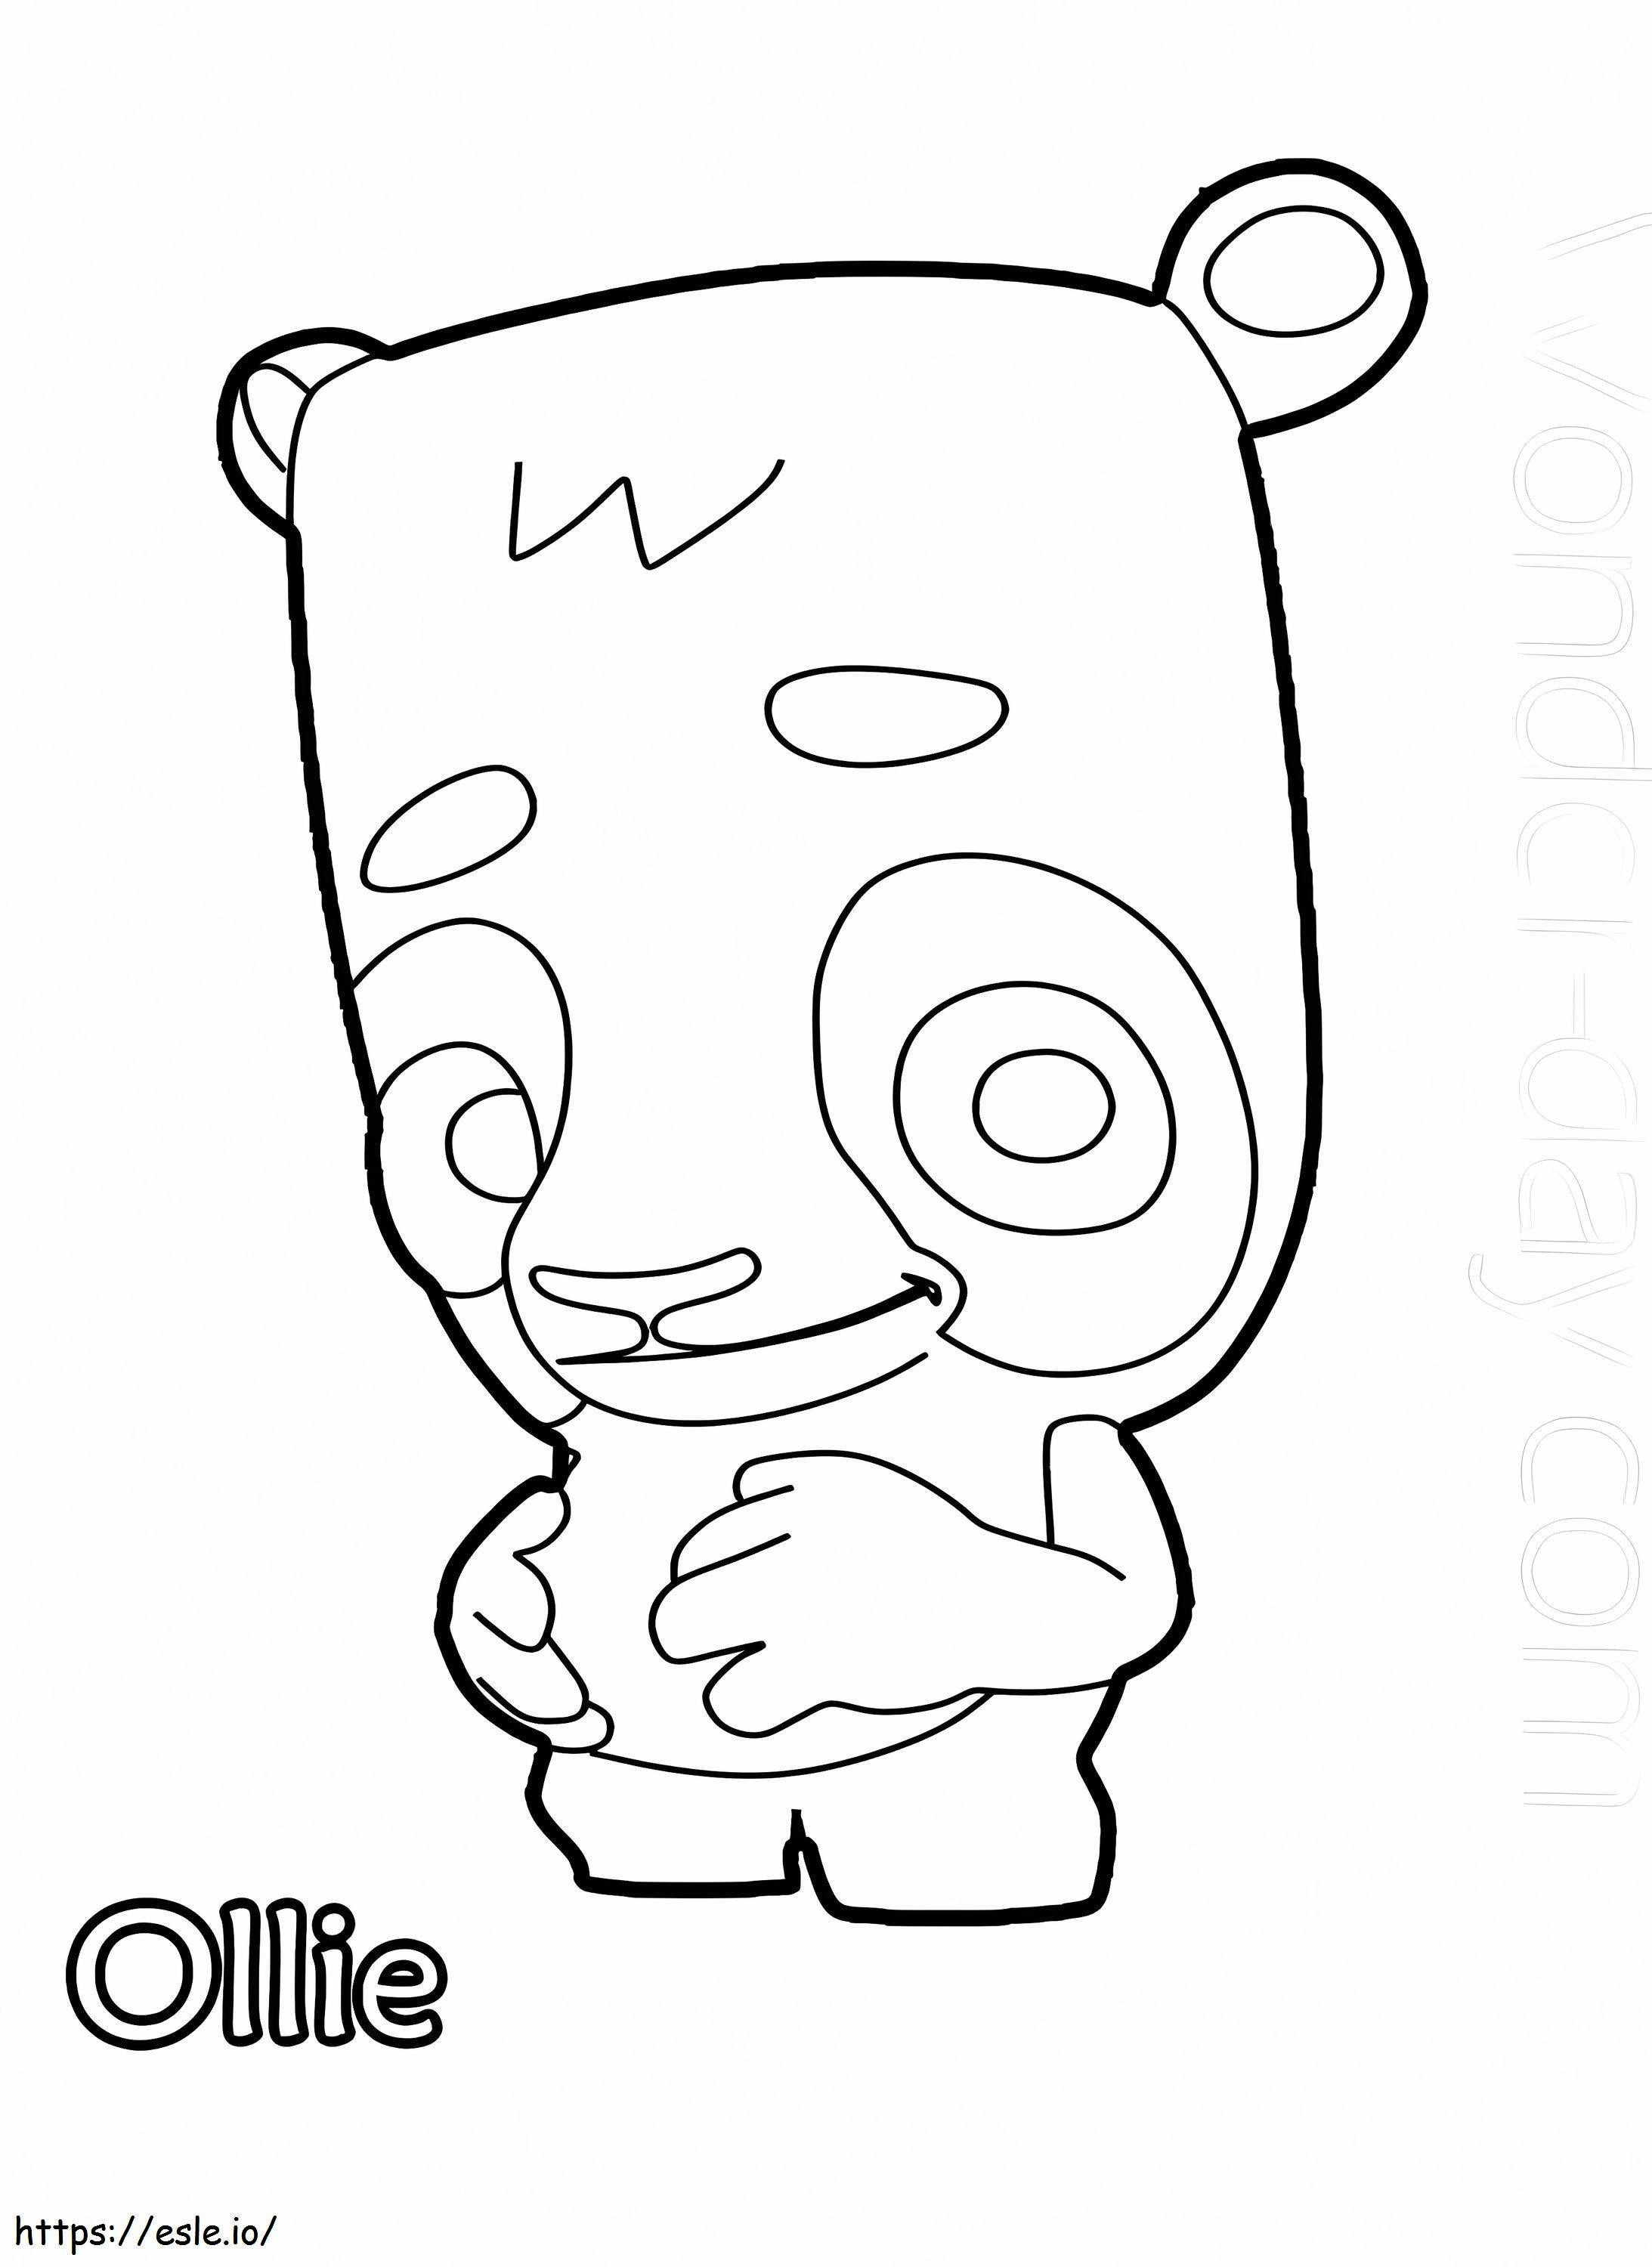 Ollie Zooba coloring page